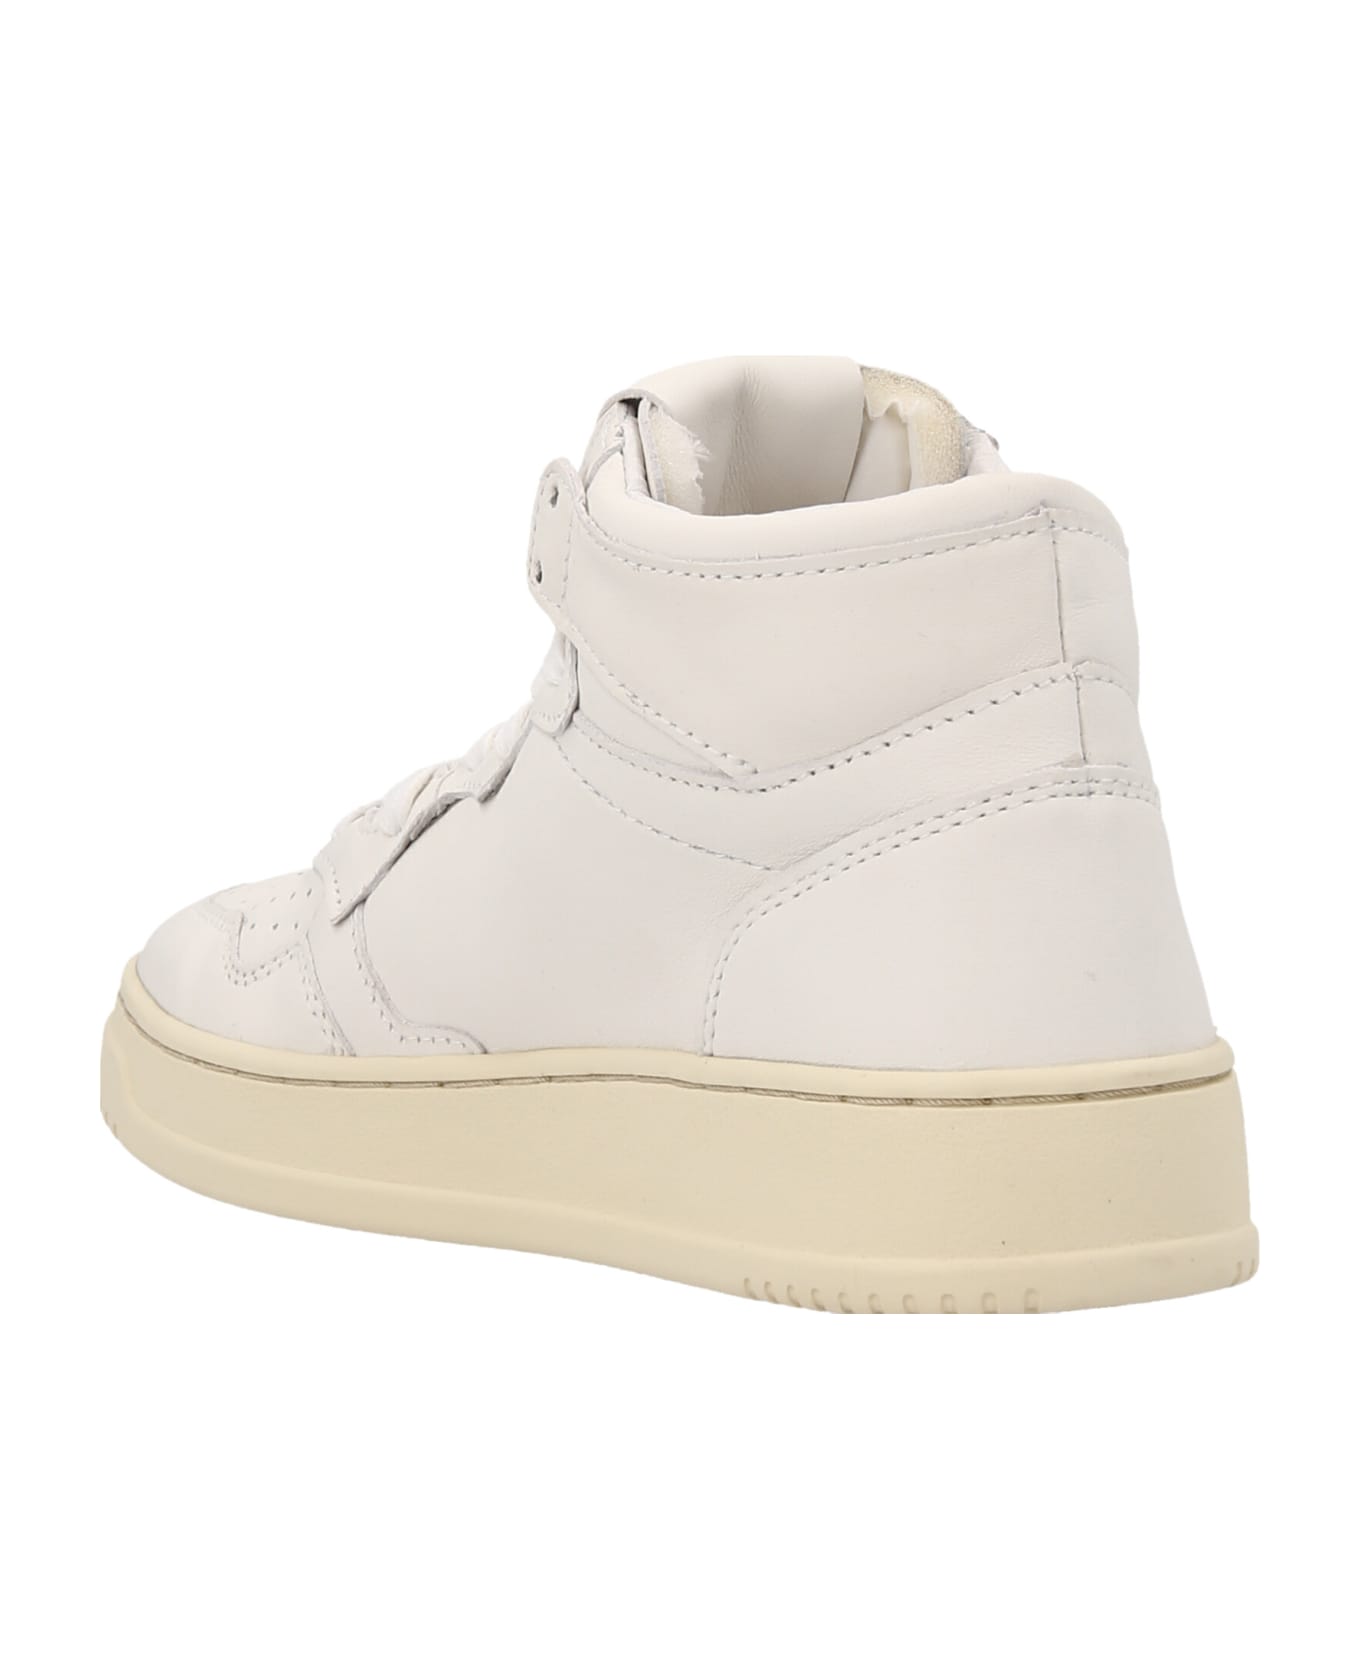 Autry 'autry 01 Mid' Sneakers - White